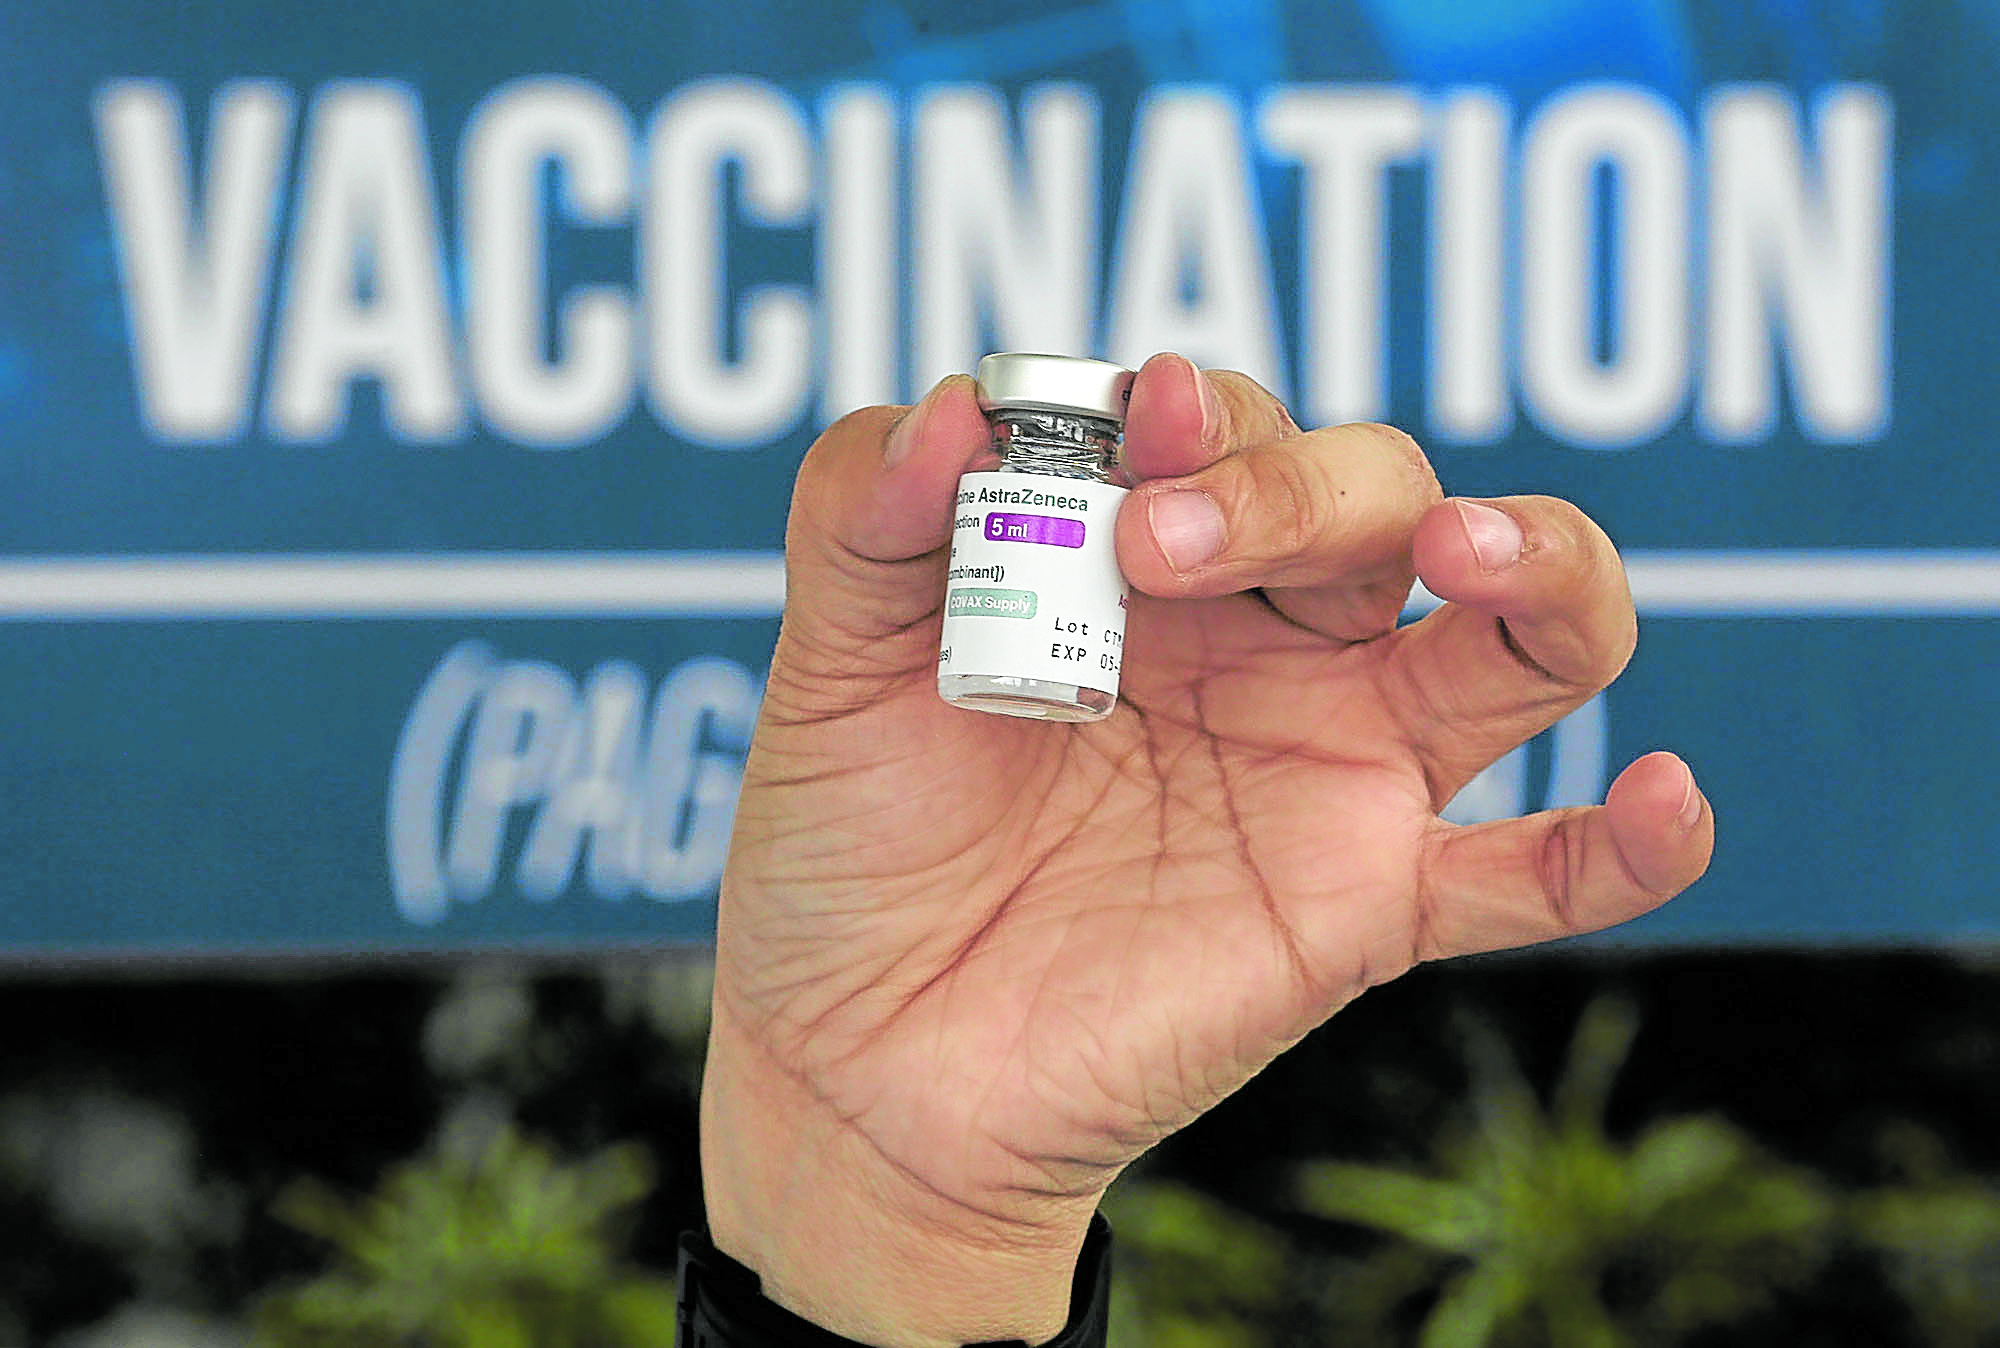 The Philippines is looking into donating COVID-19 vaccines to Myanmar and African countries to boost their supply, Health Undersecretary Myrna Cabotaje said Tuesday.